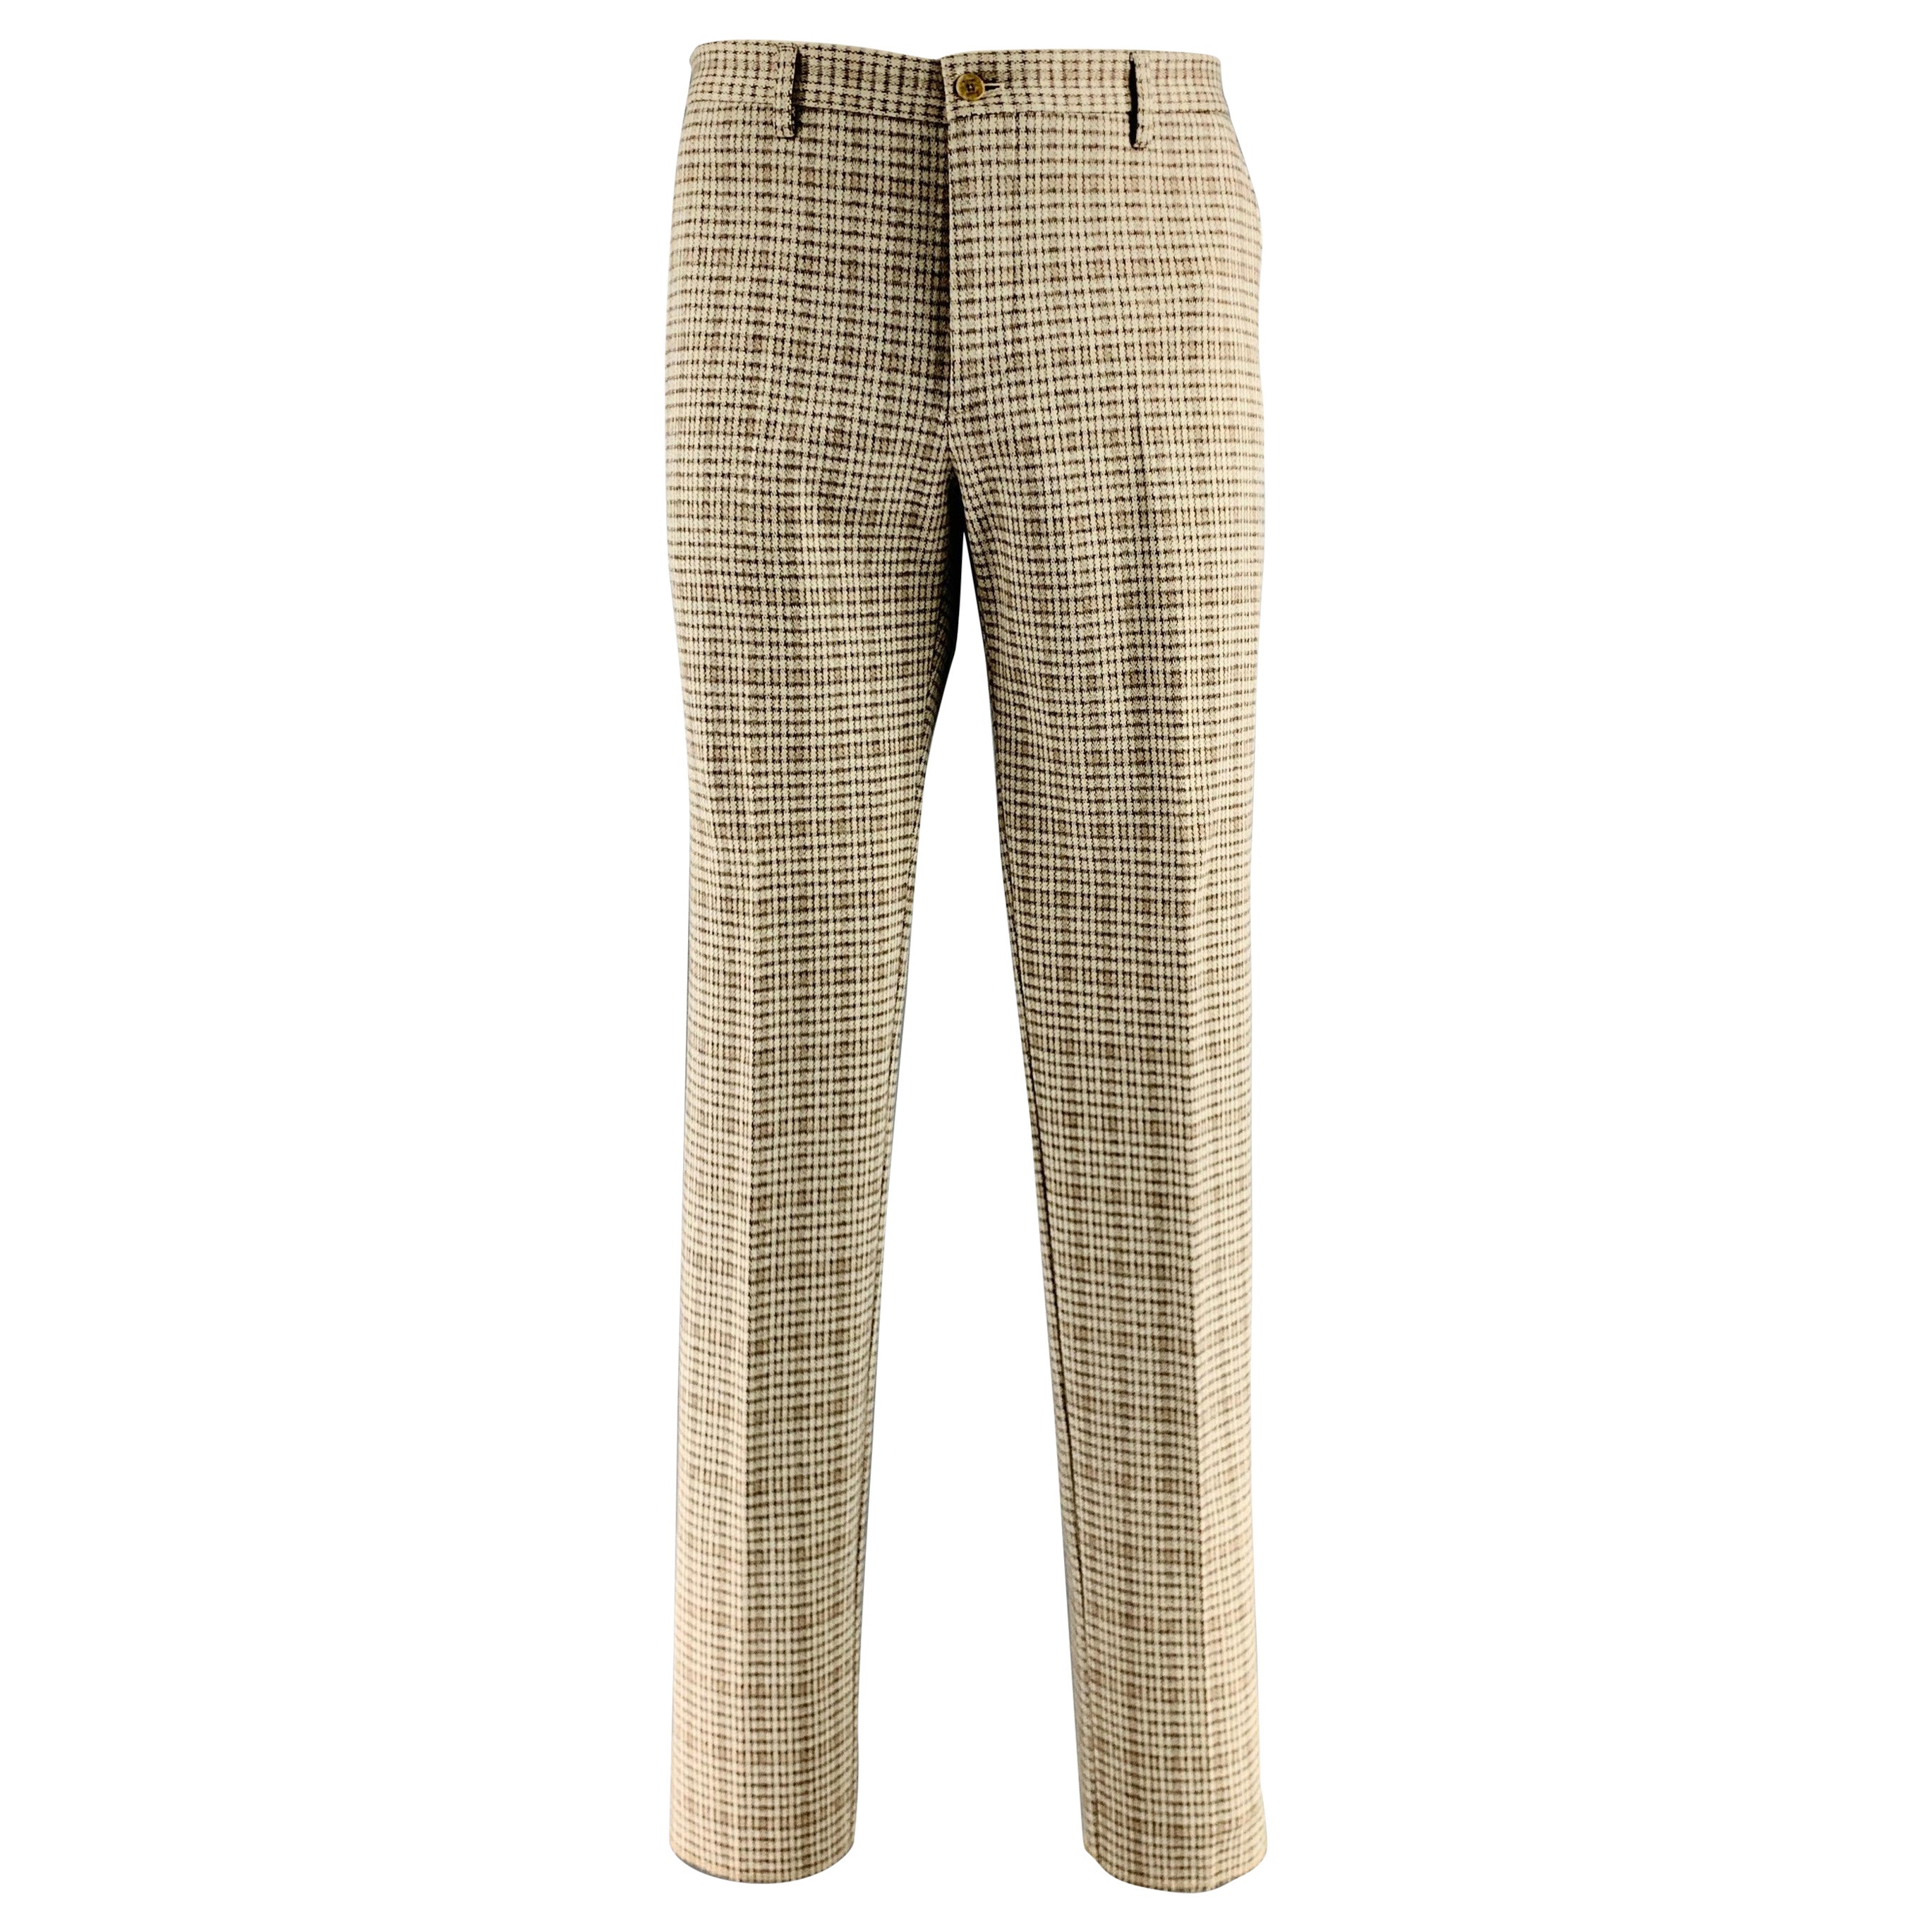 ETRO Size 38 Grey Taupe Houndstooth Cotton Wool Flat Front Dress Pants For Sale